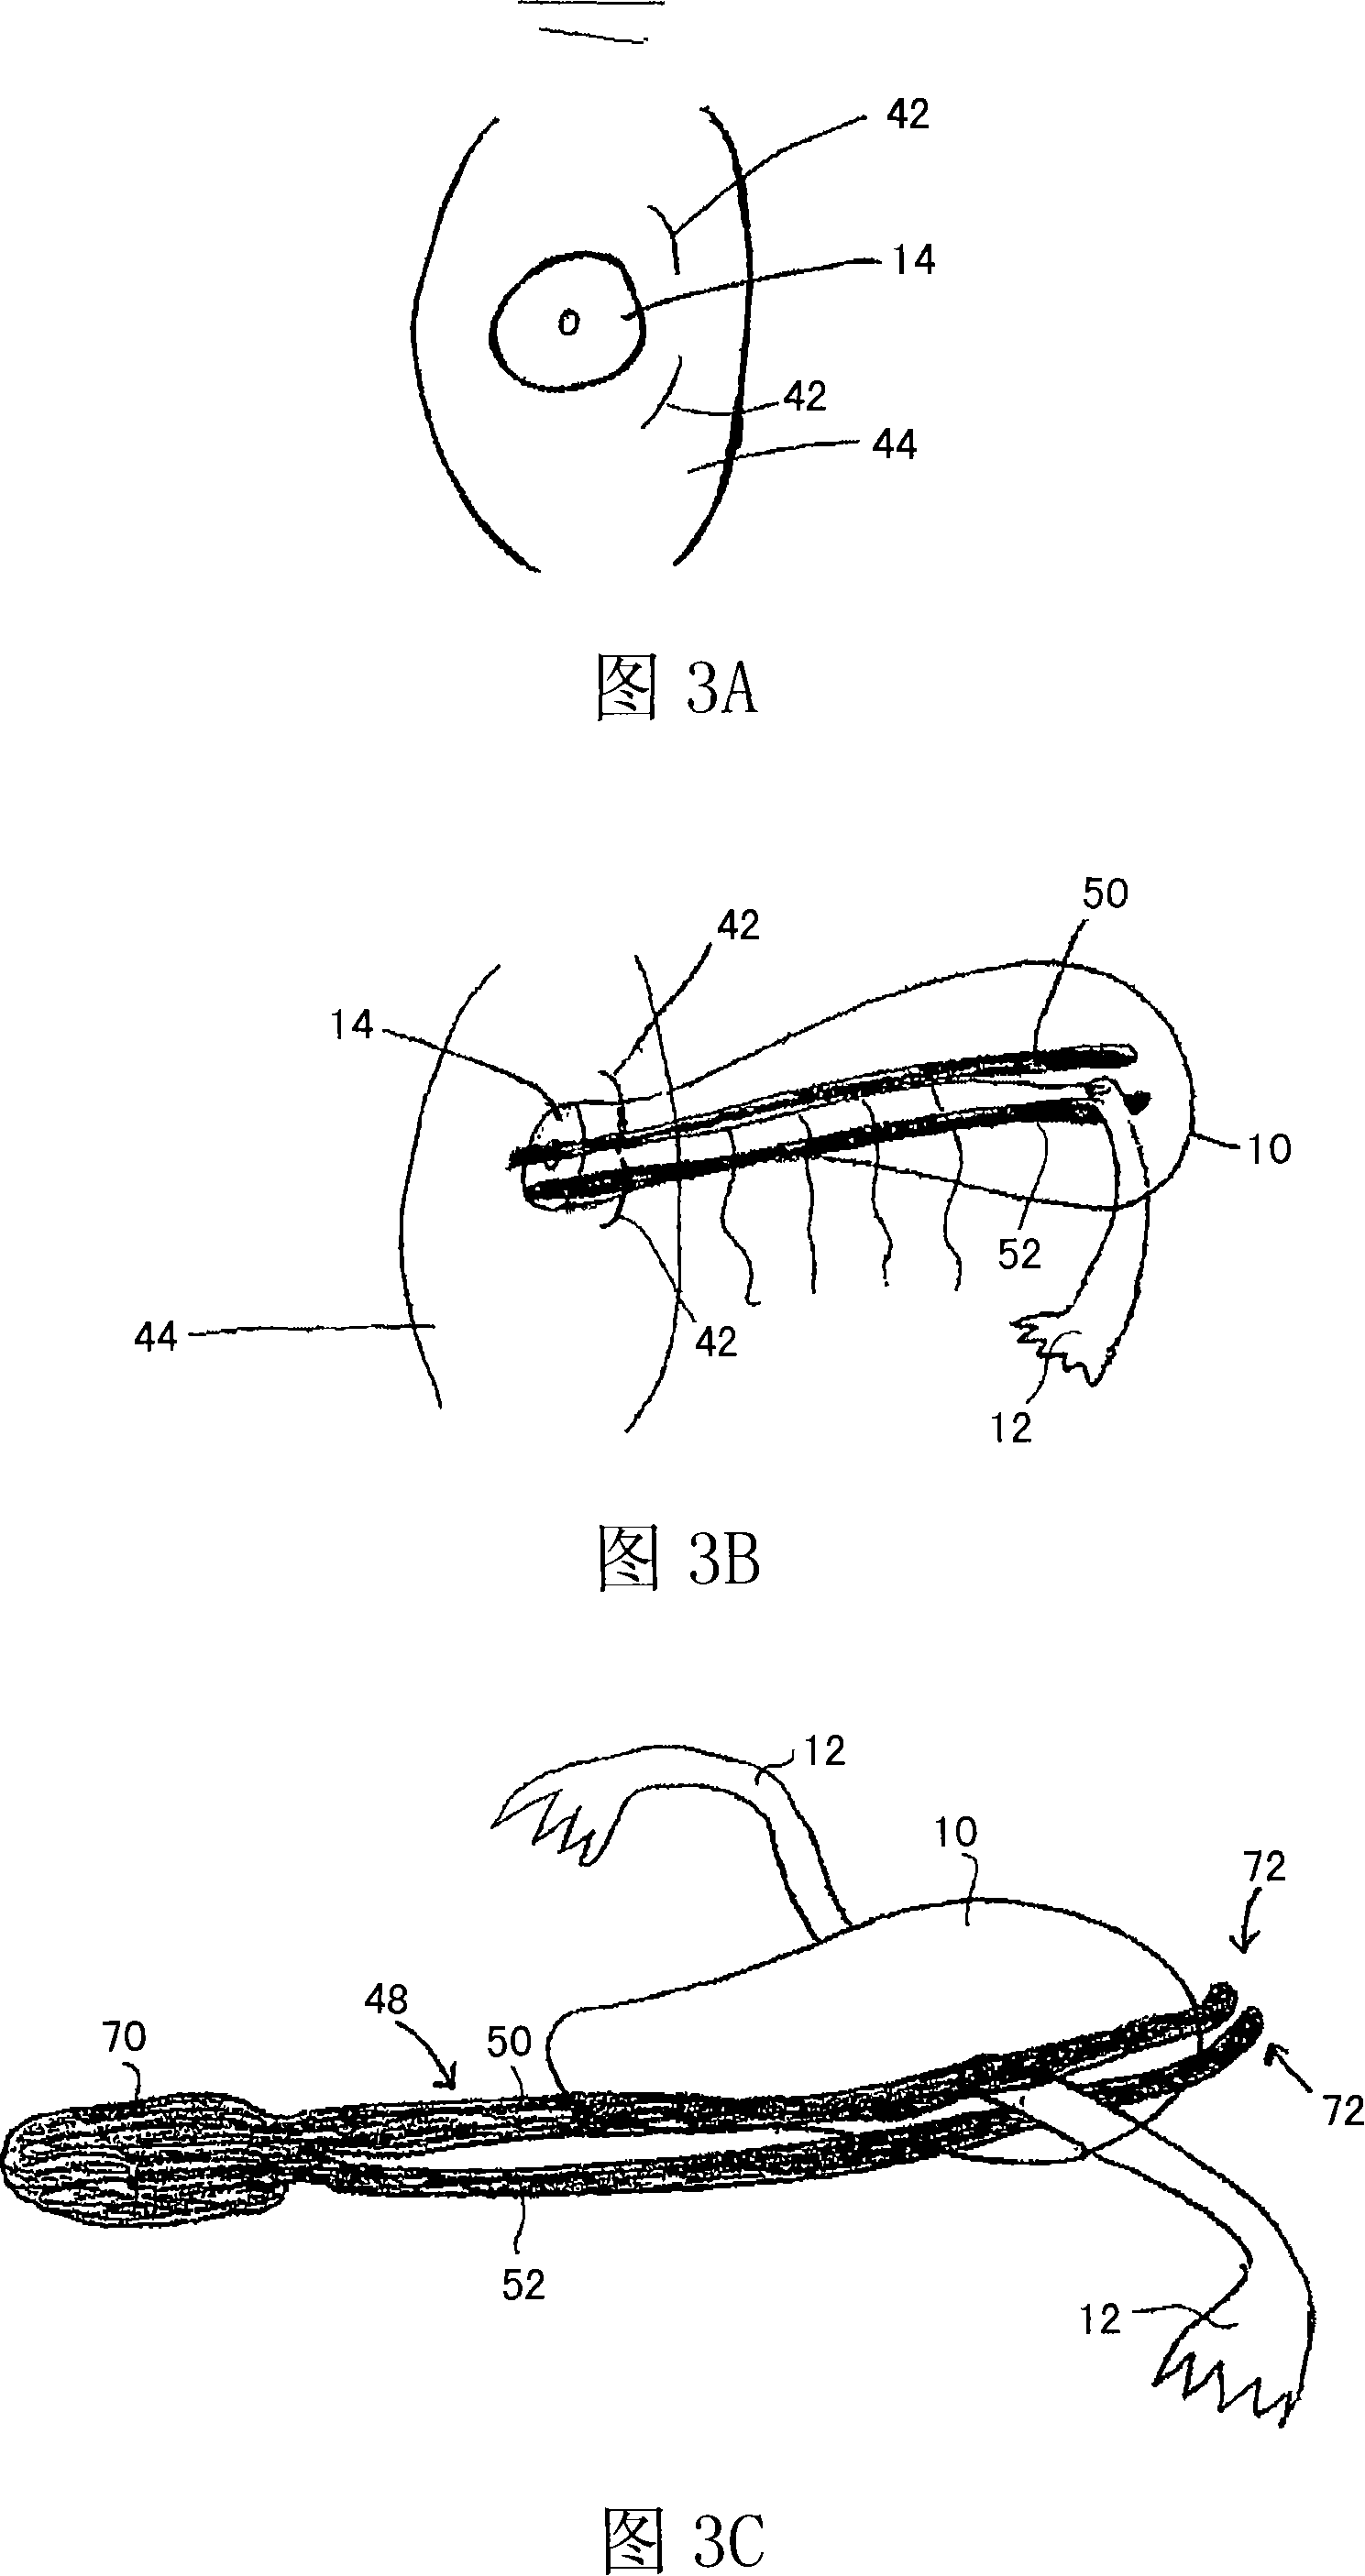 Method and apparatus for performing a surgical procedure